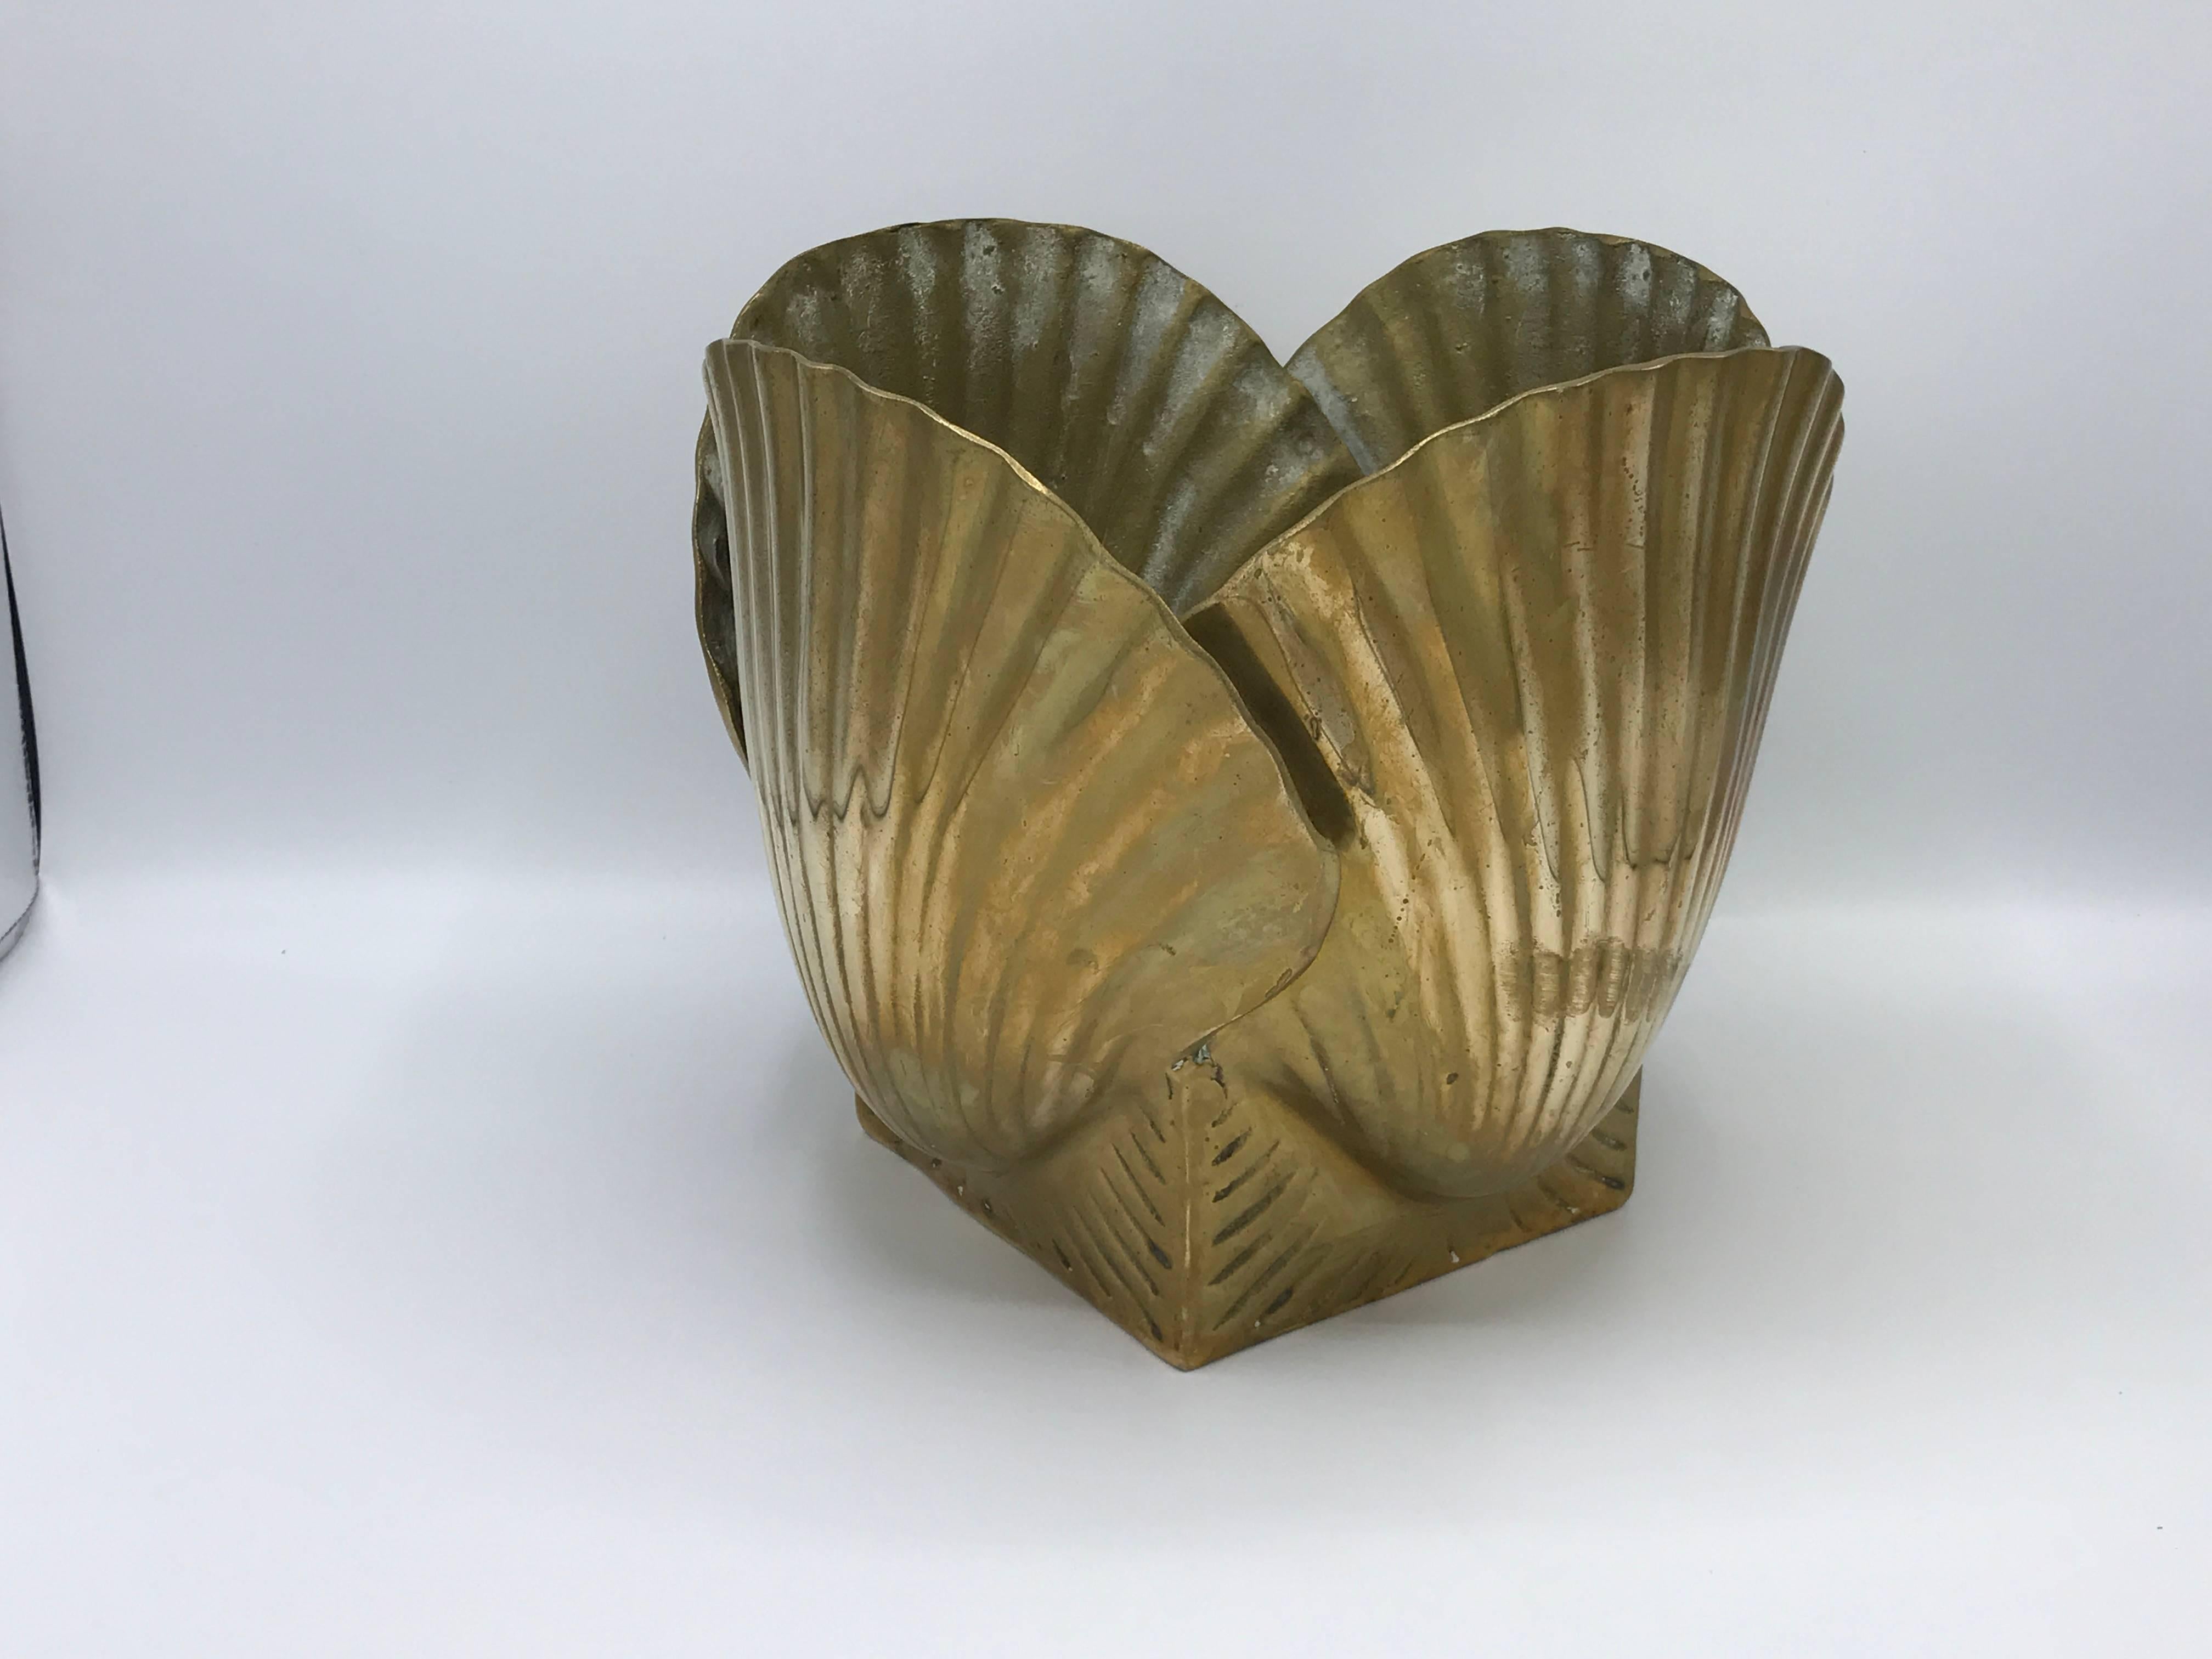 Offered is a stunning, 1970s Hollywood Regency and Palm Beach style, solid brass seashell cachepot planter.